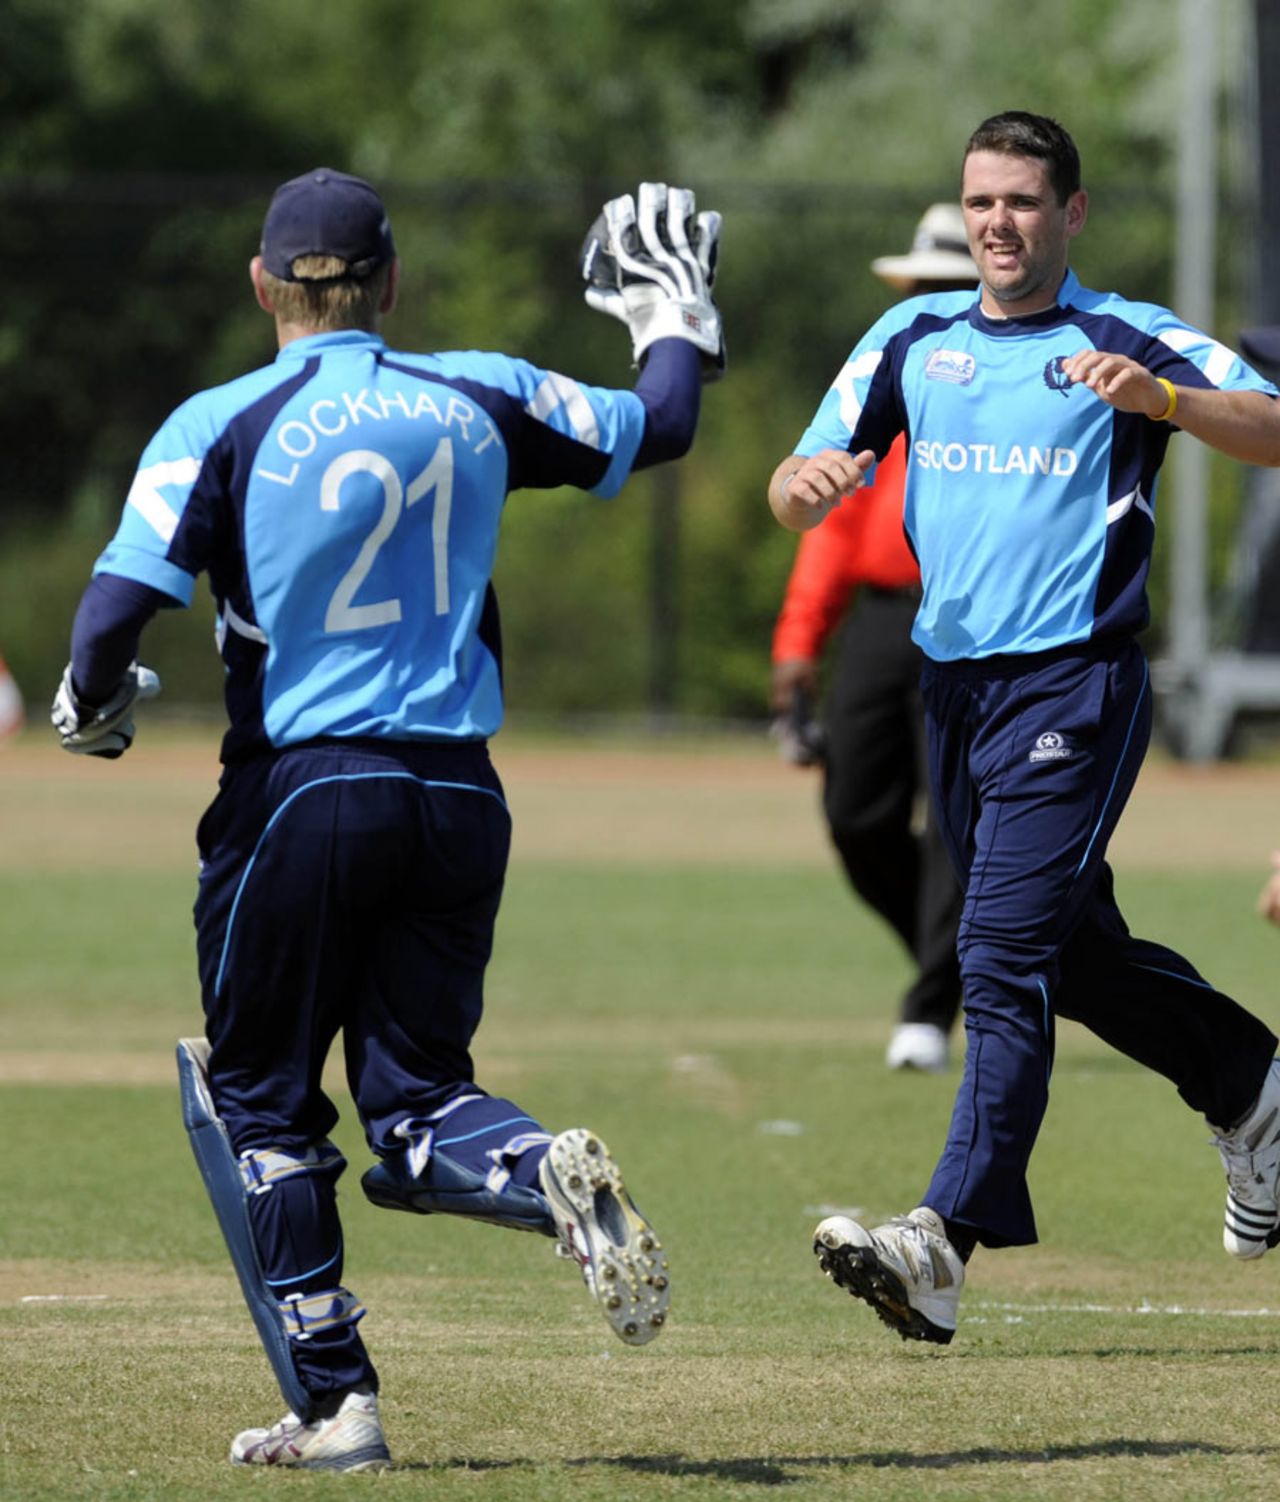 Scotland's George Goudie celebrates a wicket, Afghanistan v Scotland, ICC WCL Division 1, Rotterdam, July 9, 2010 